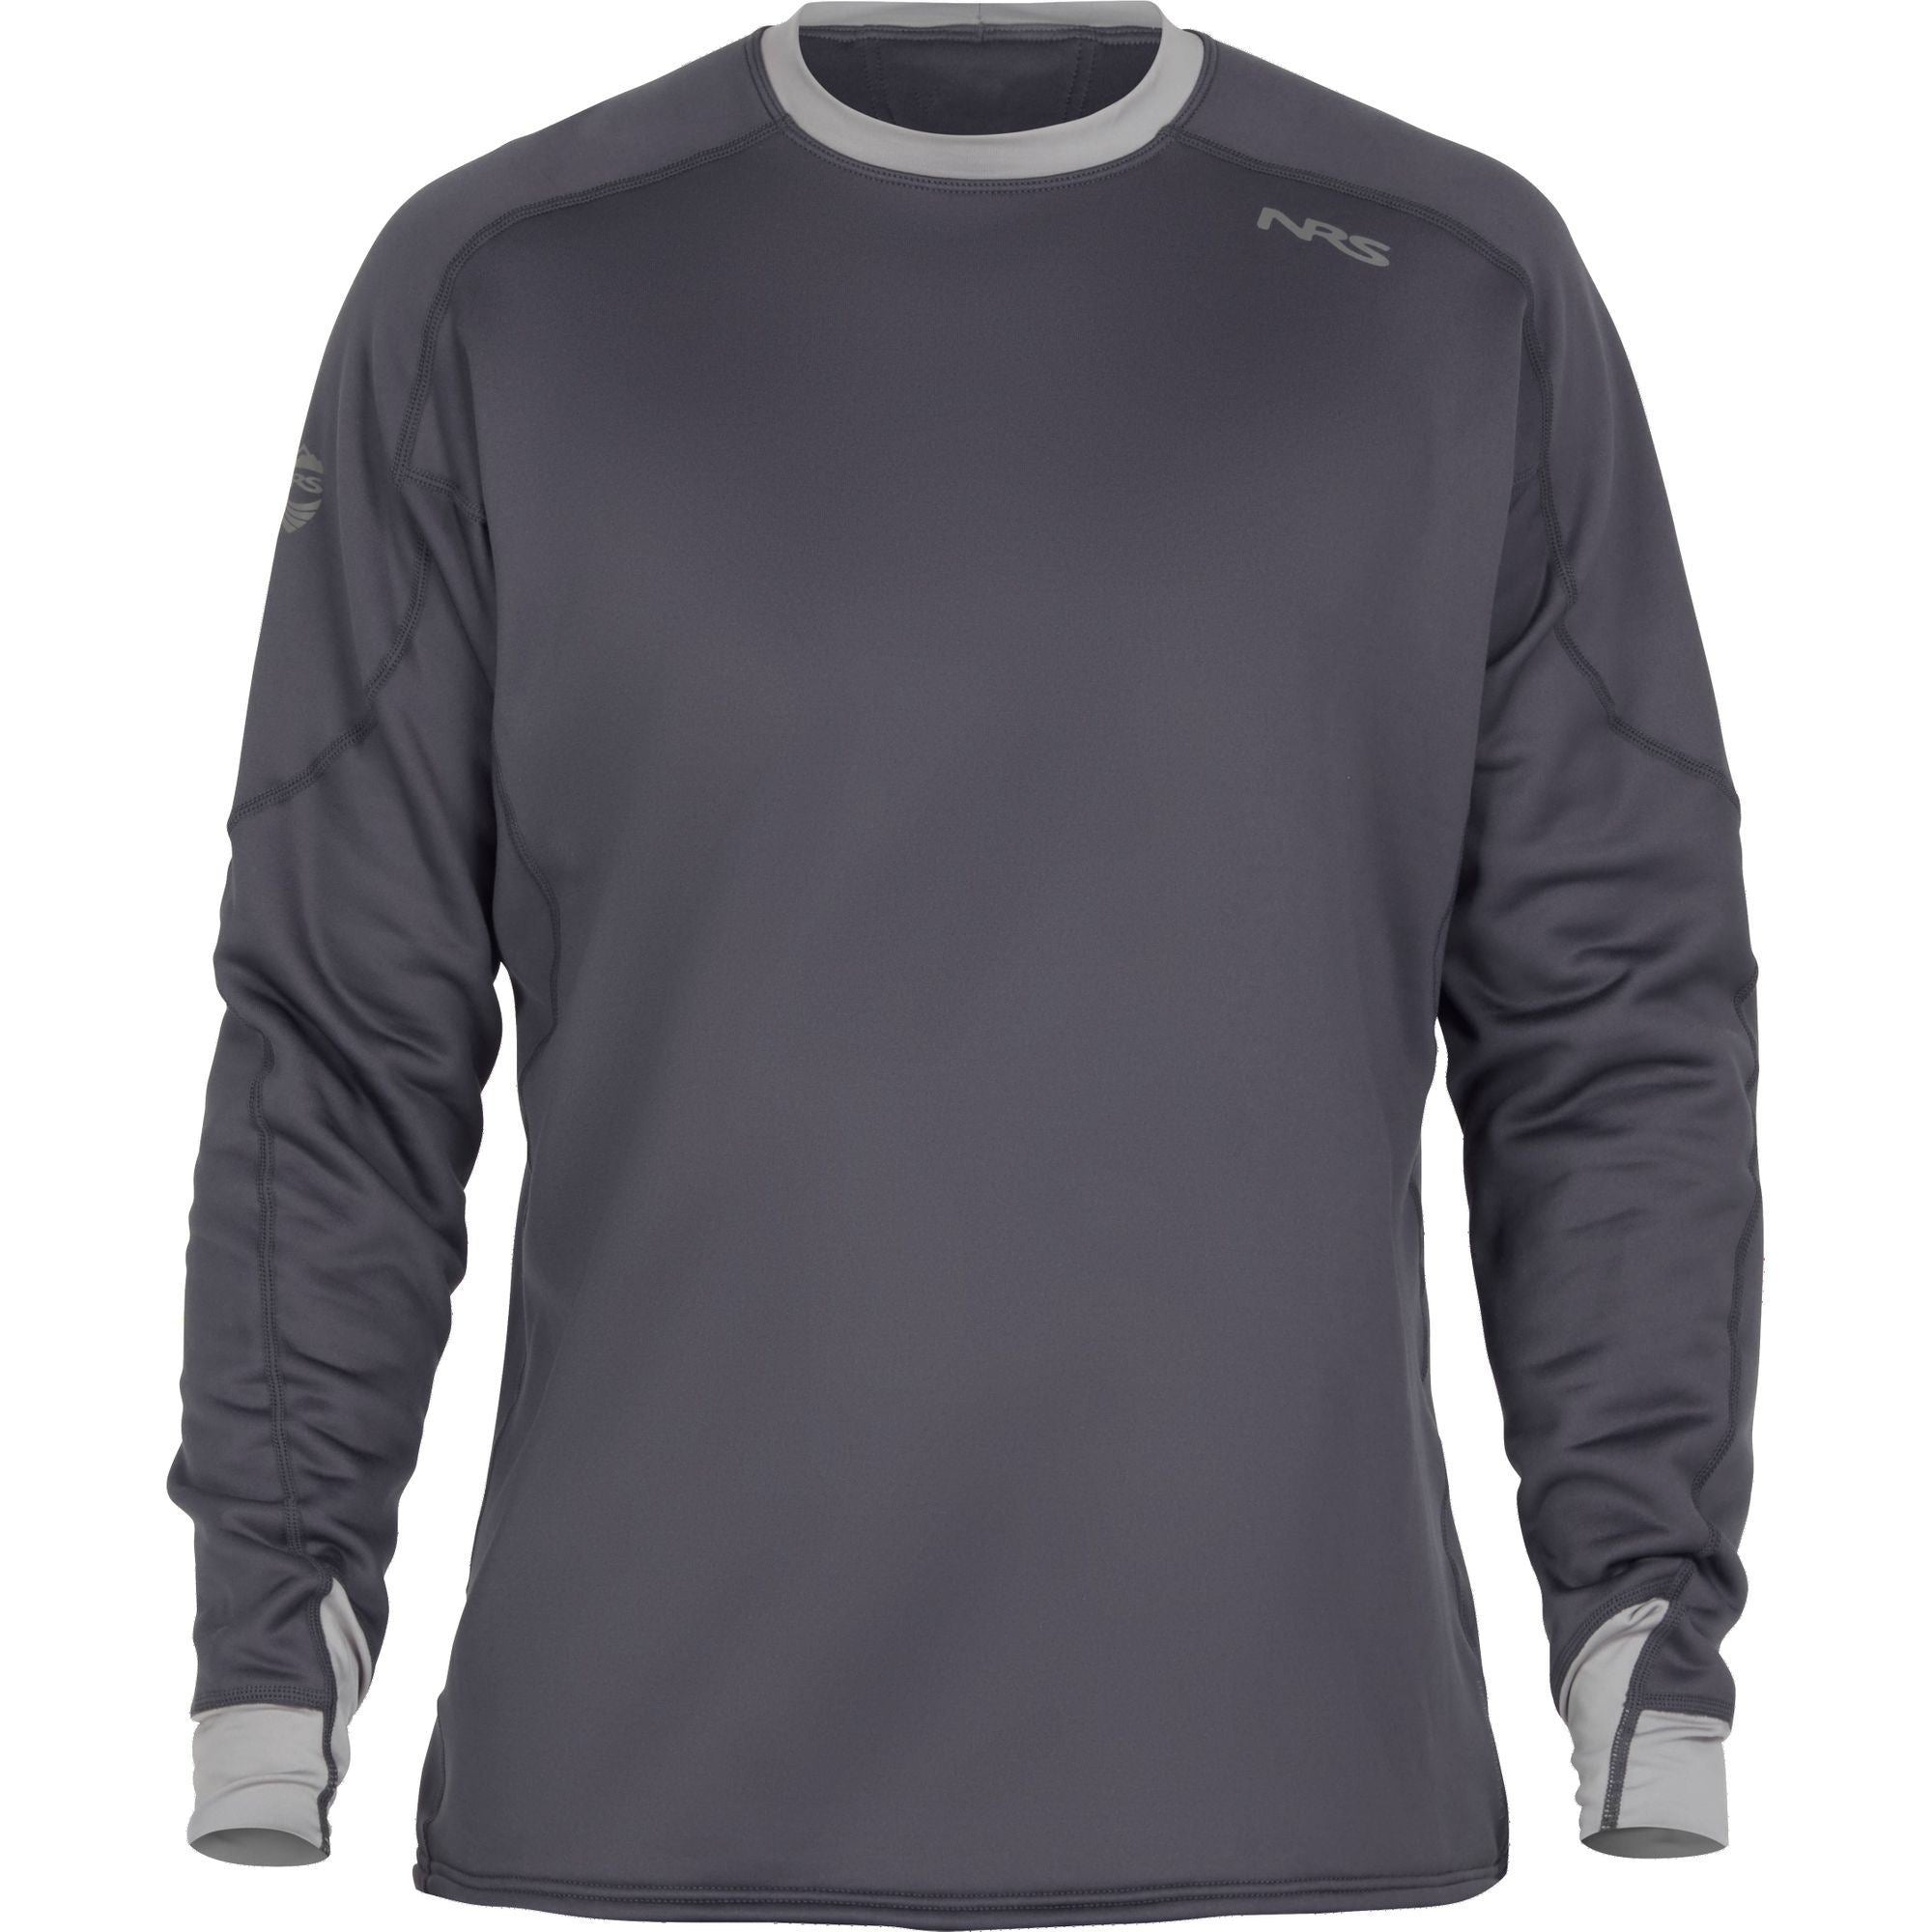 NRS Expedition Weight Union Shirt, Men's